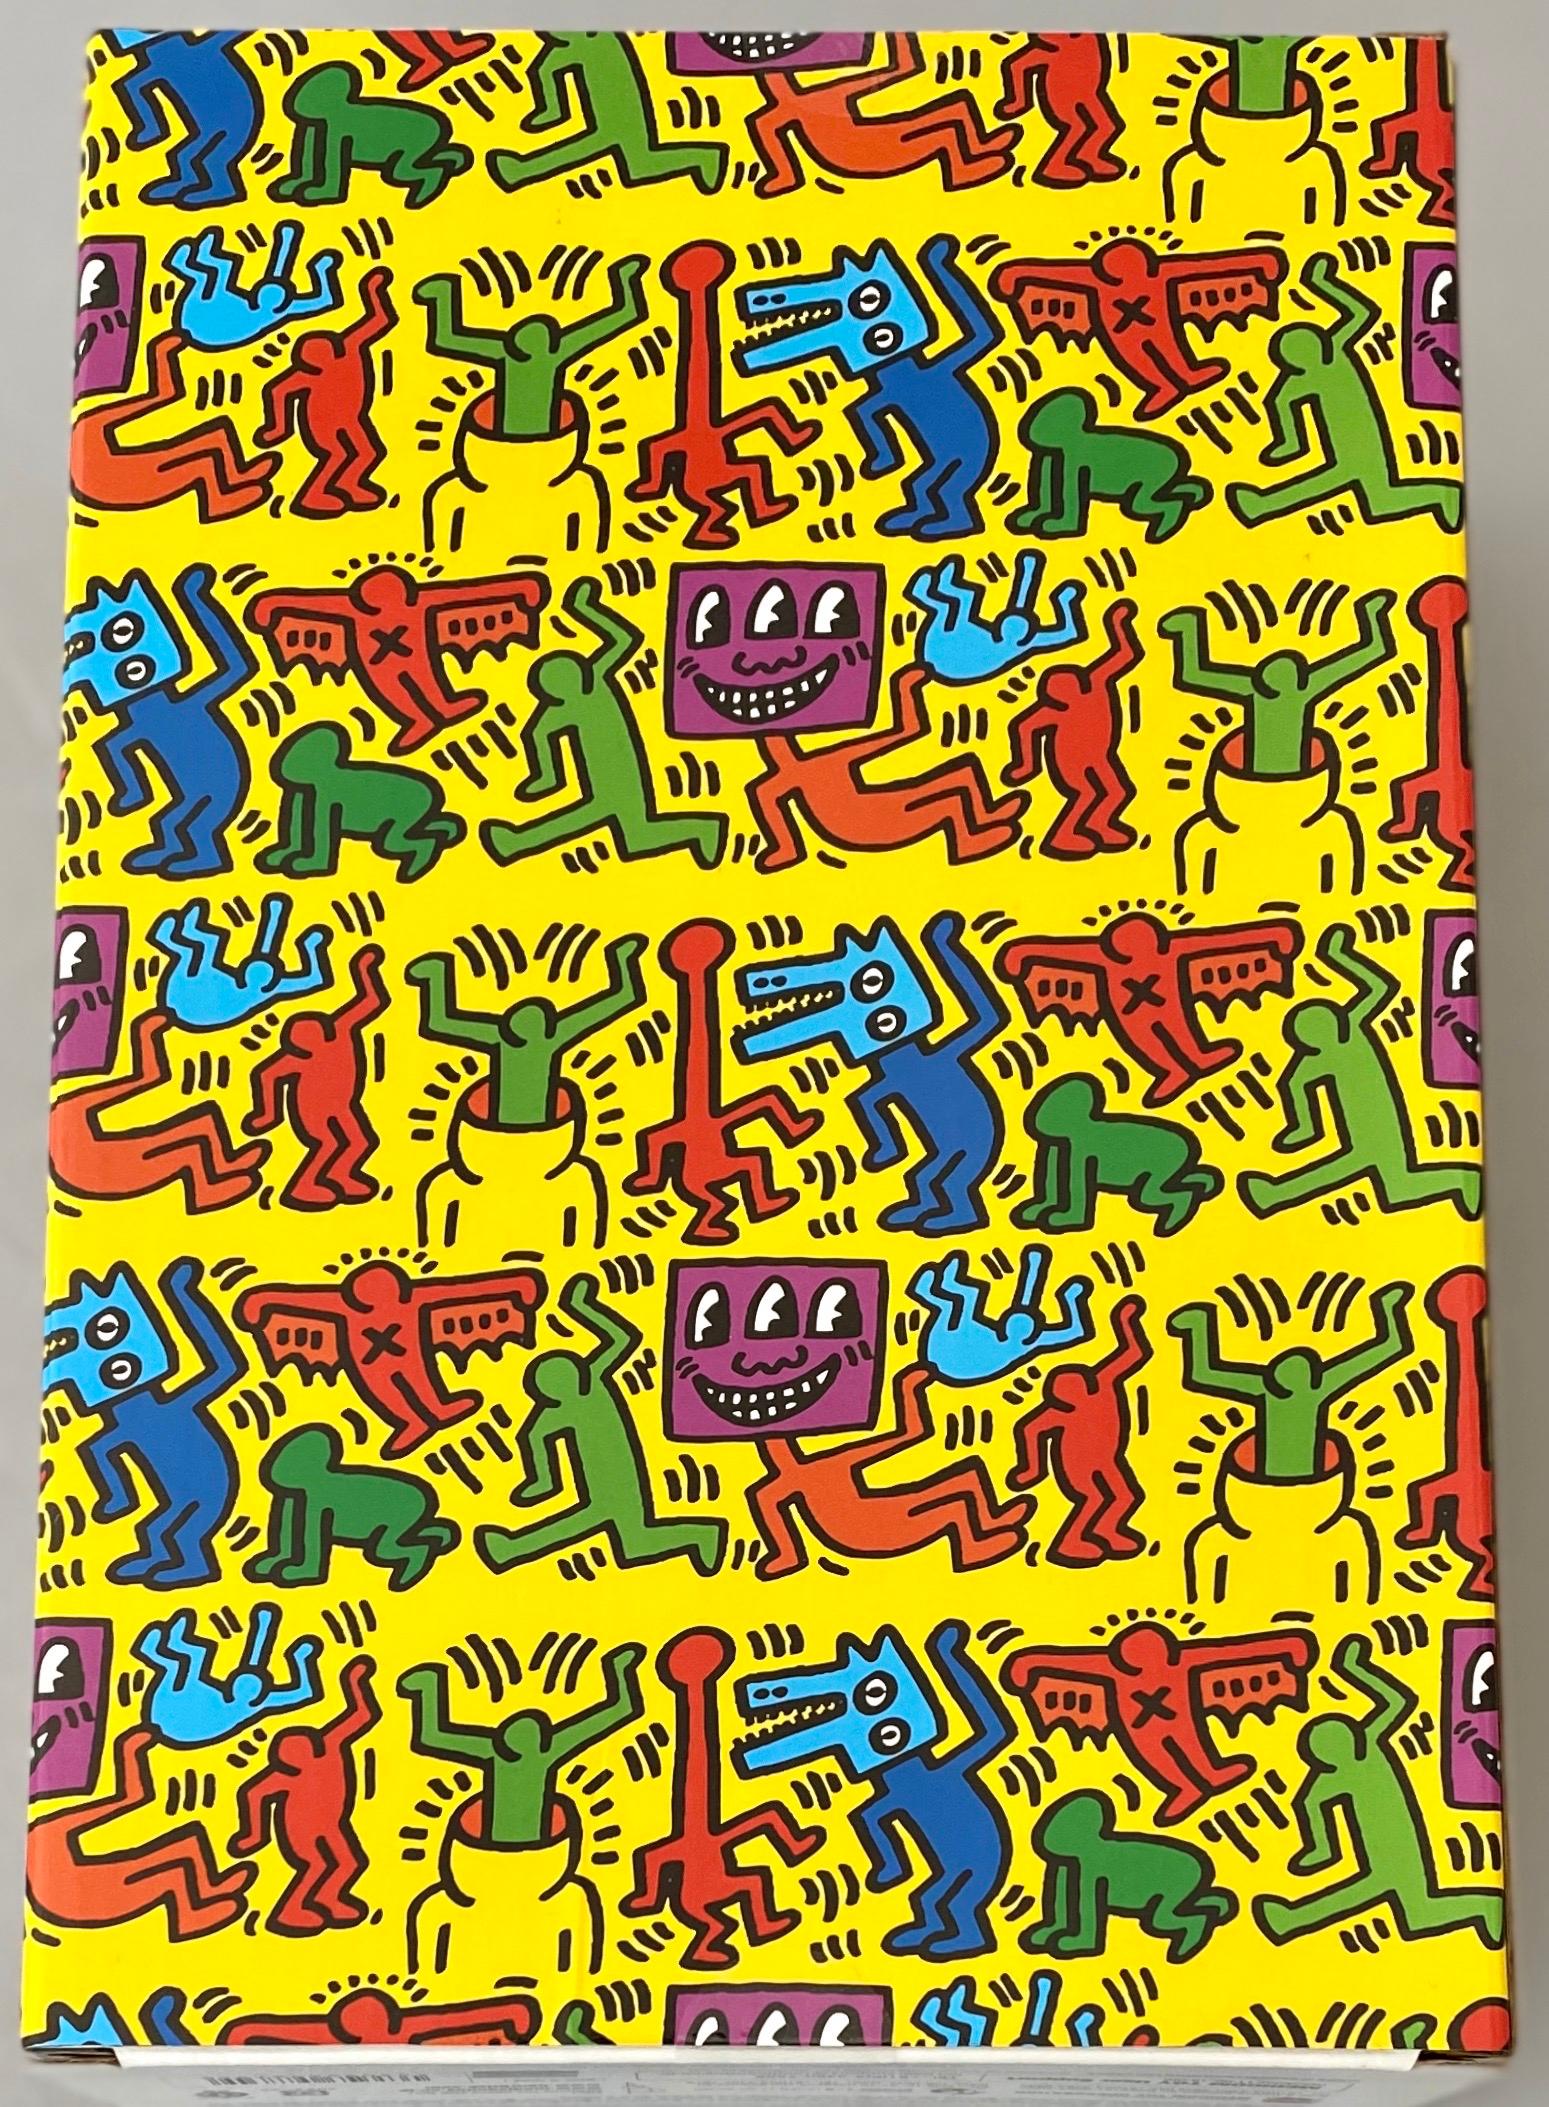 Keith Haring Bearbrick 400% figure (Haring BE@RBRICK) For Sale 1